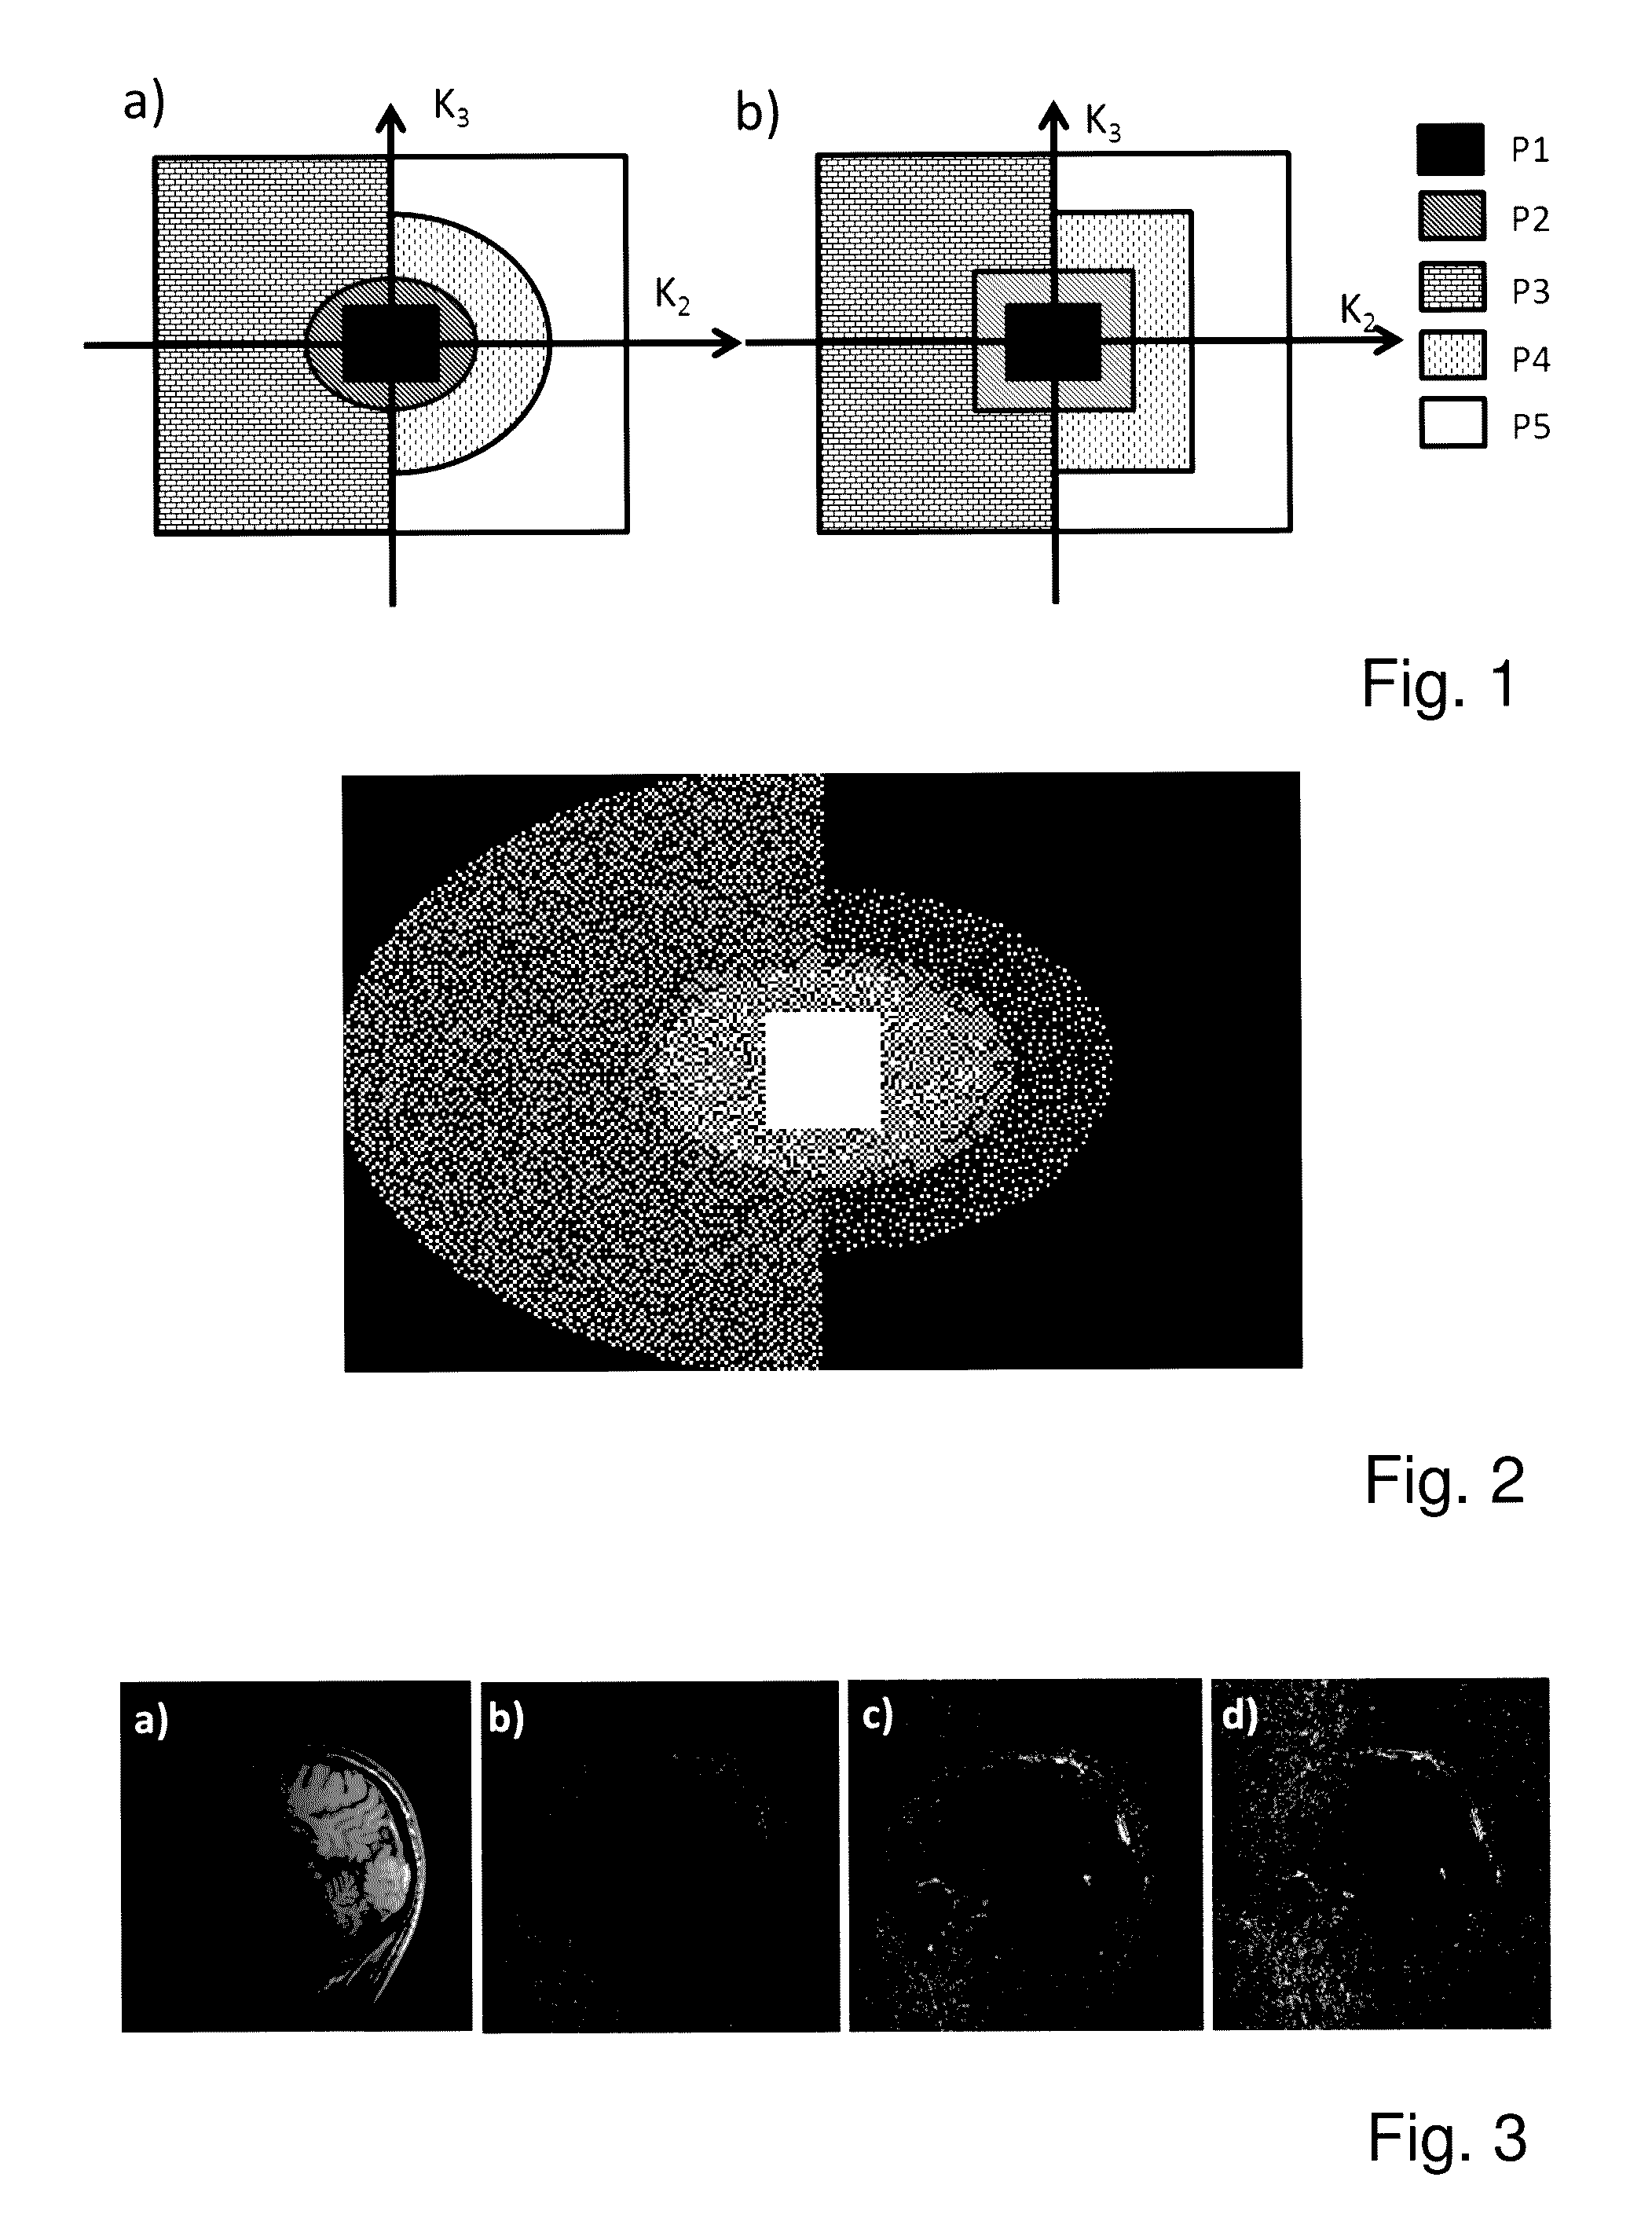 Method for accelerating magnetic resonance imaging using varying k-space sampling density and phase-constrained reconstruction